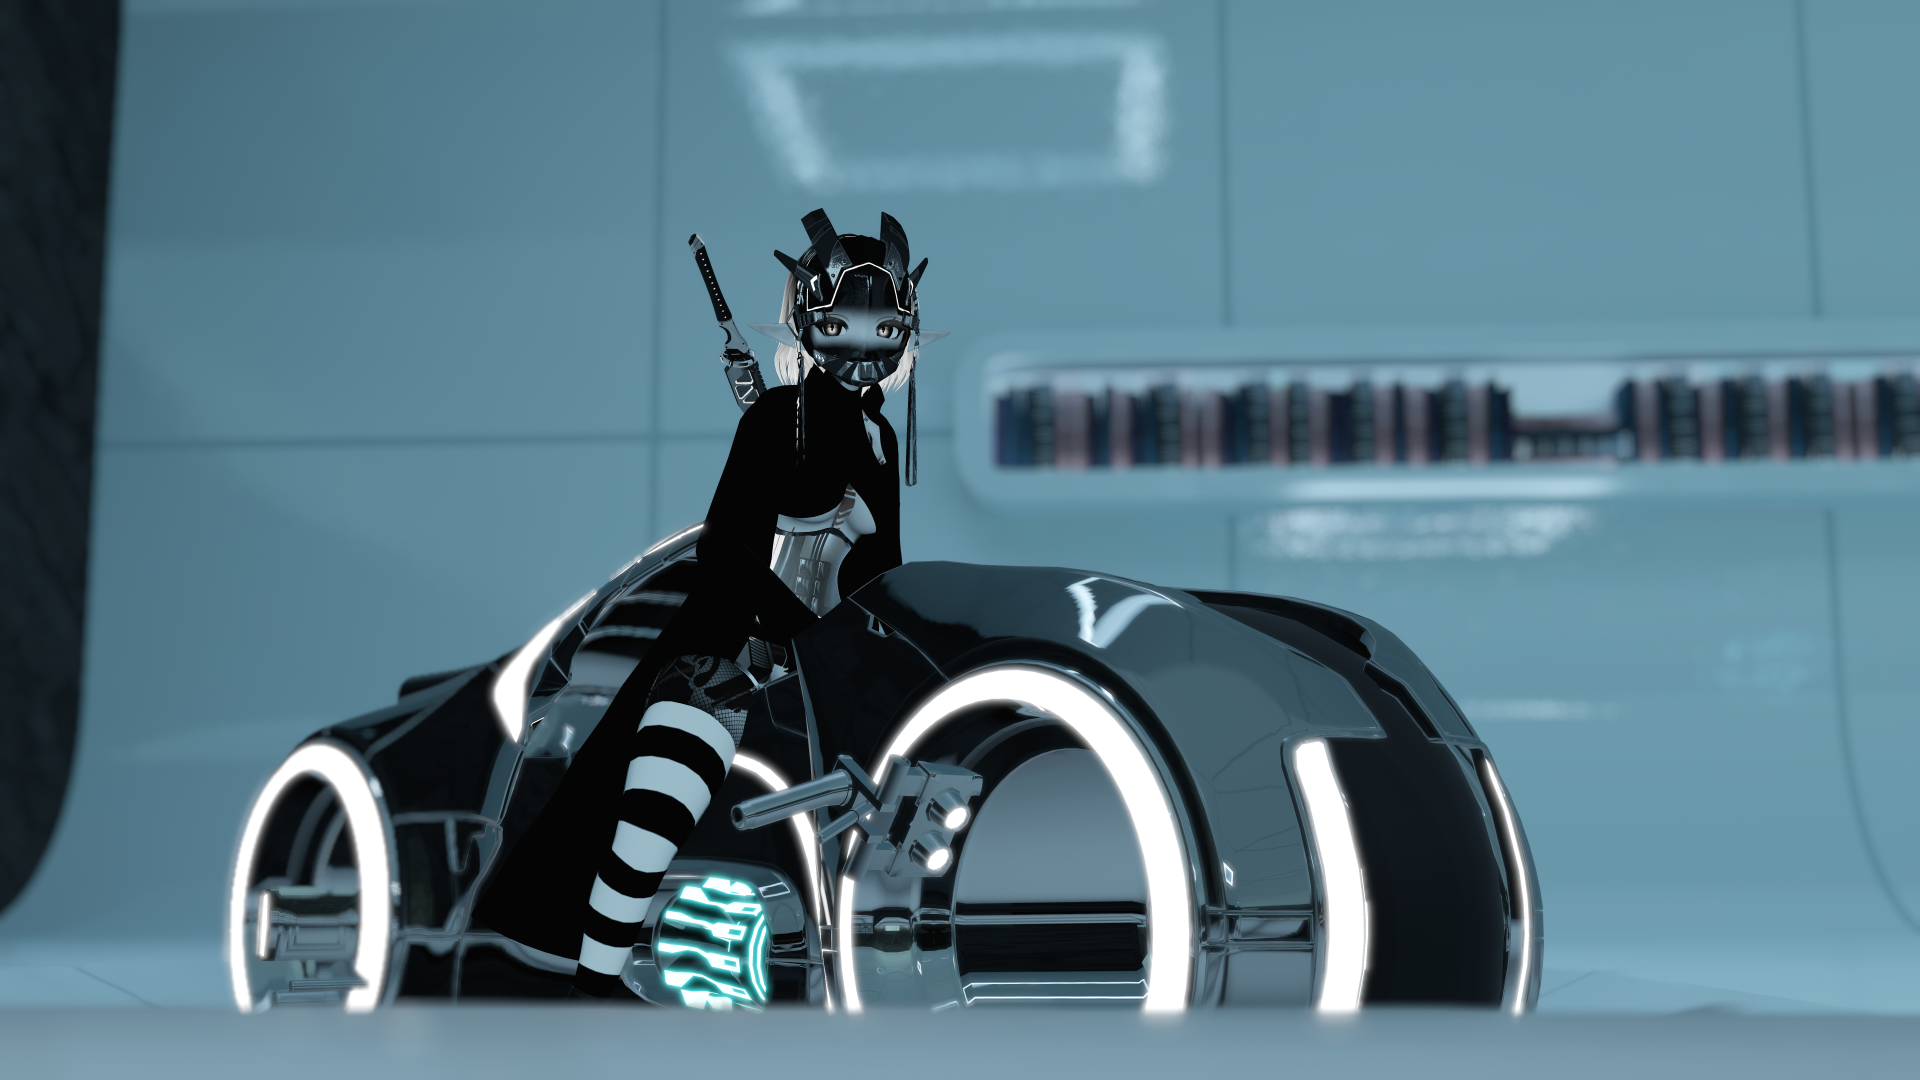 VRChat TRON: Legacy Image